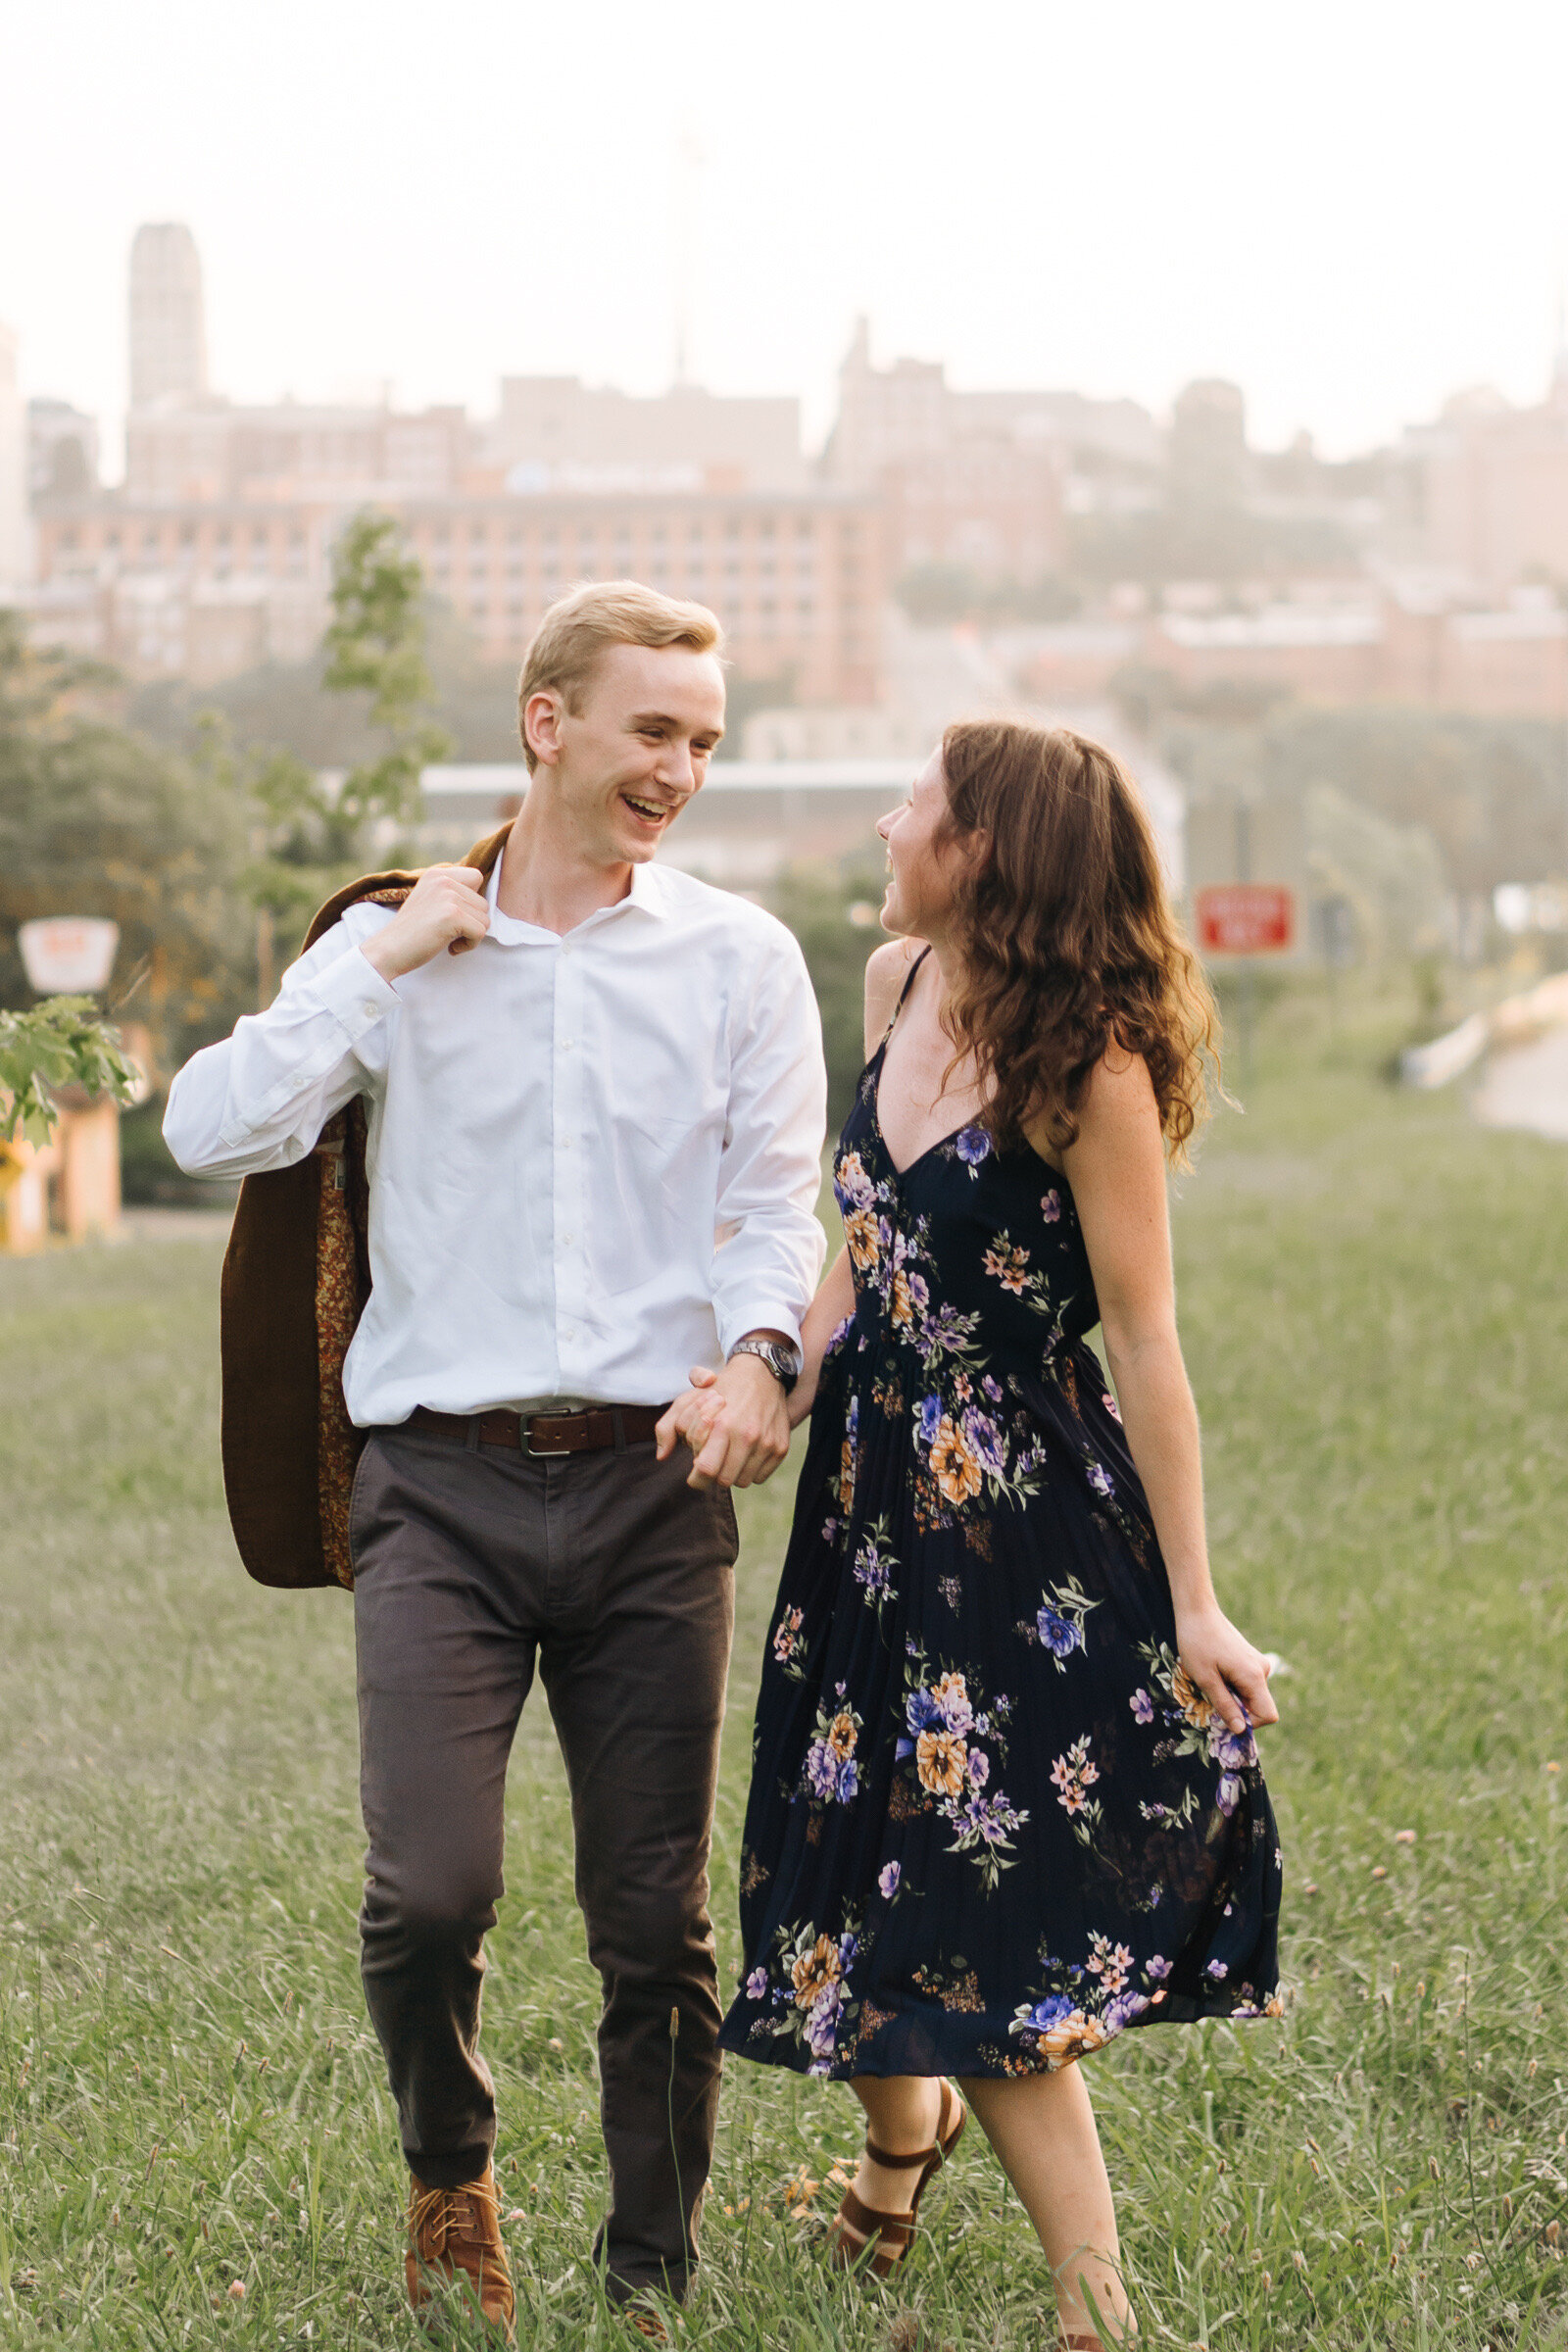 grant-rachel-downtown-lynchburg-virginia-summer-lifestyle-in-the-river-romantic-flirty-and-fun-engagement-session-by-jonathan-hannah-photography-9.jpg